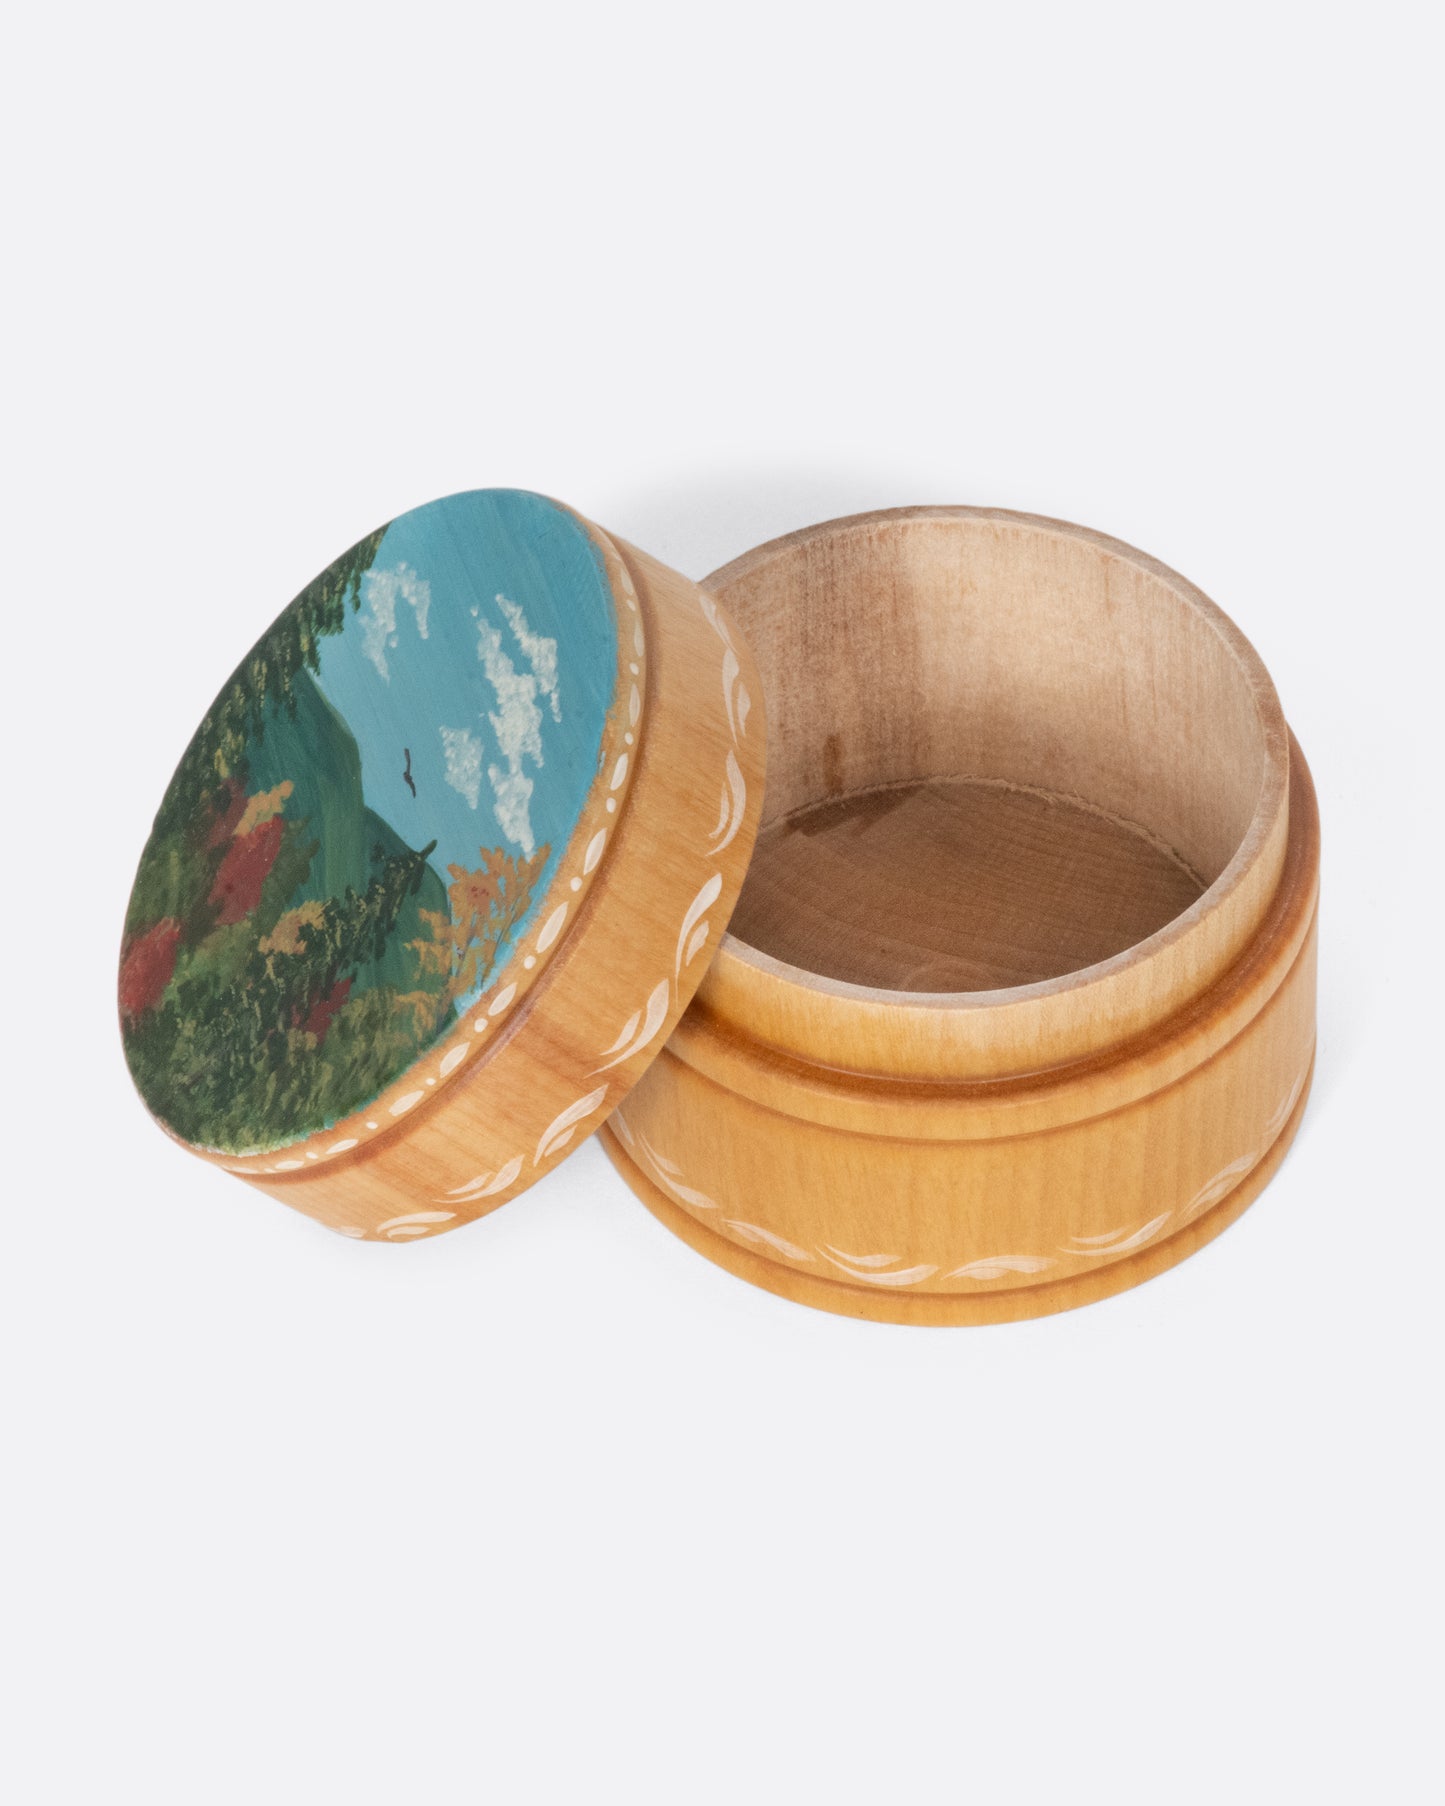 A vintage round wooden box with a beautiful landscape painting on the lid.